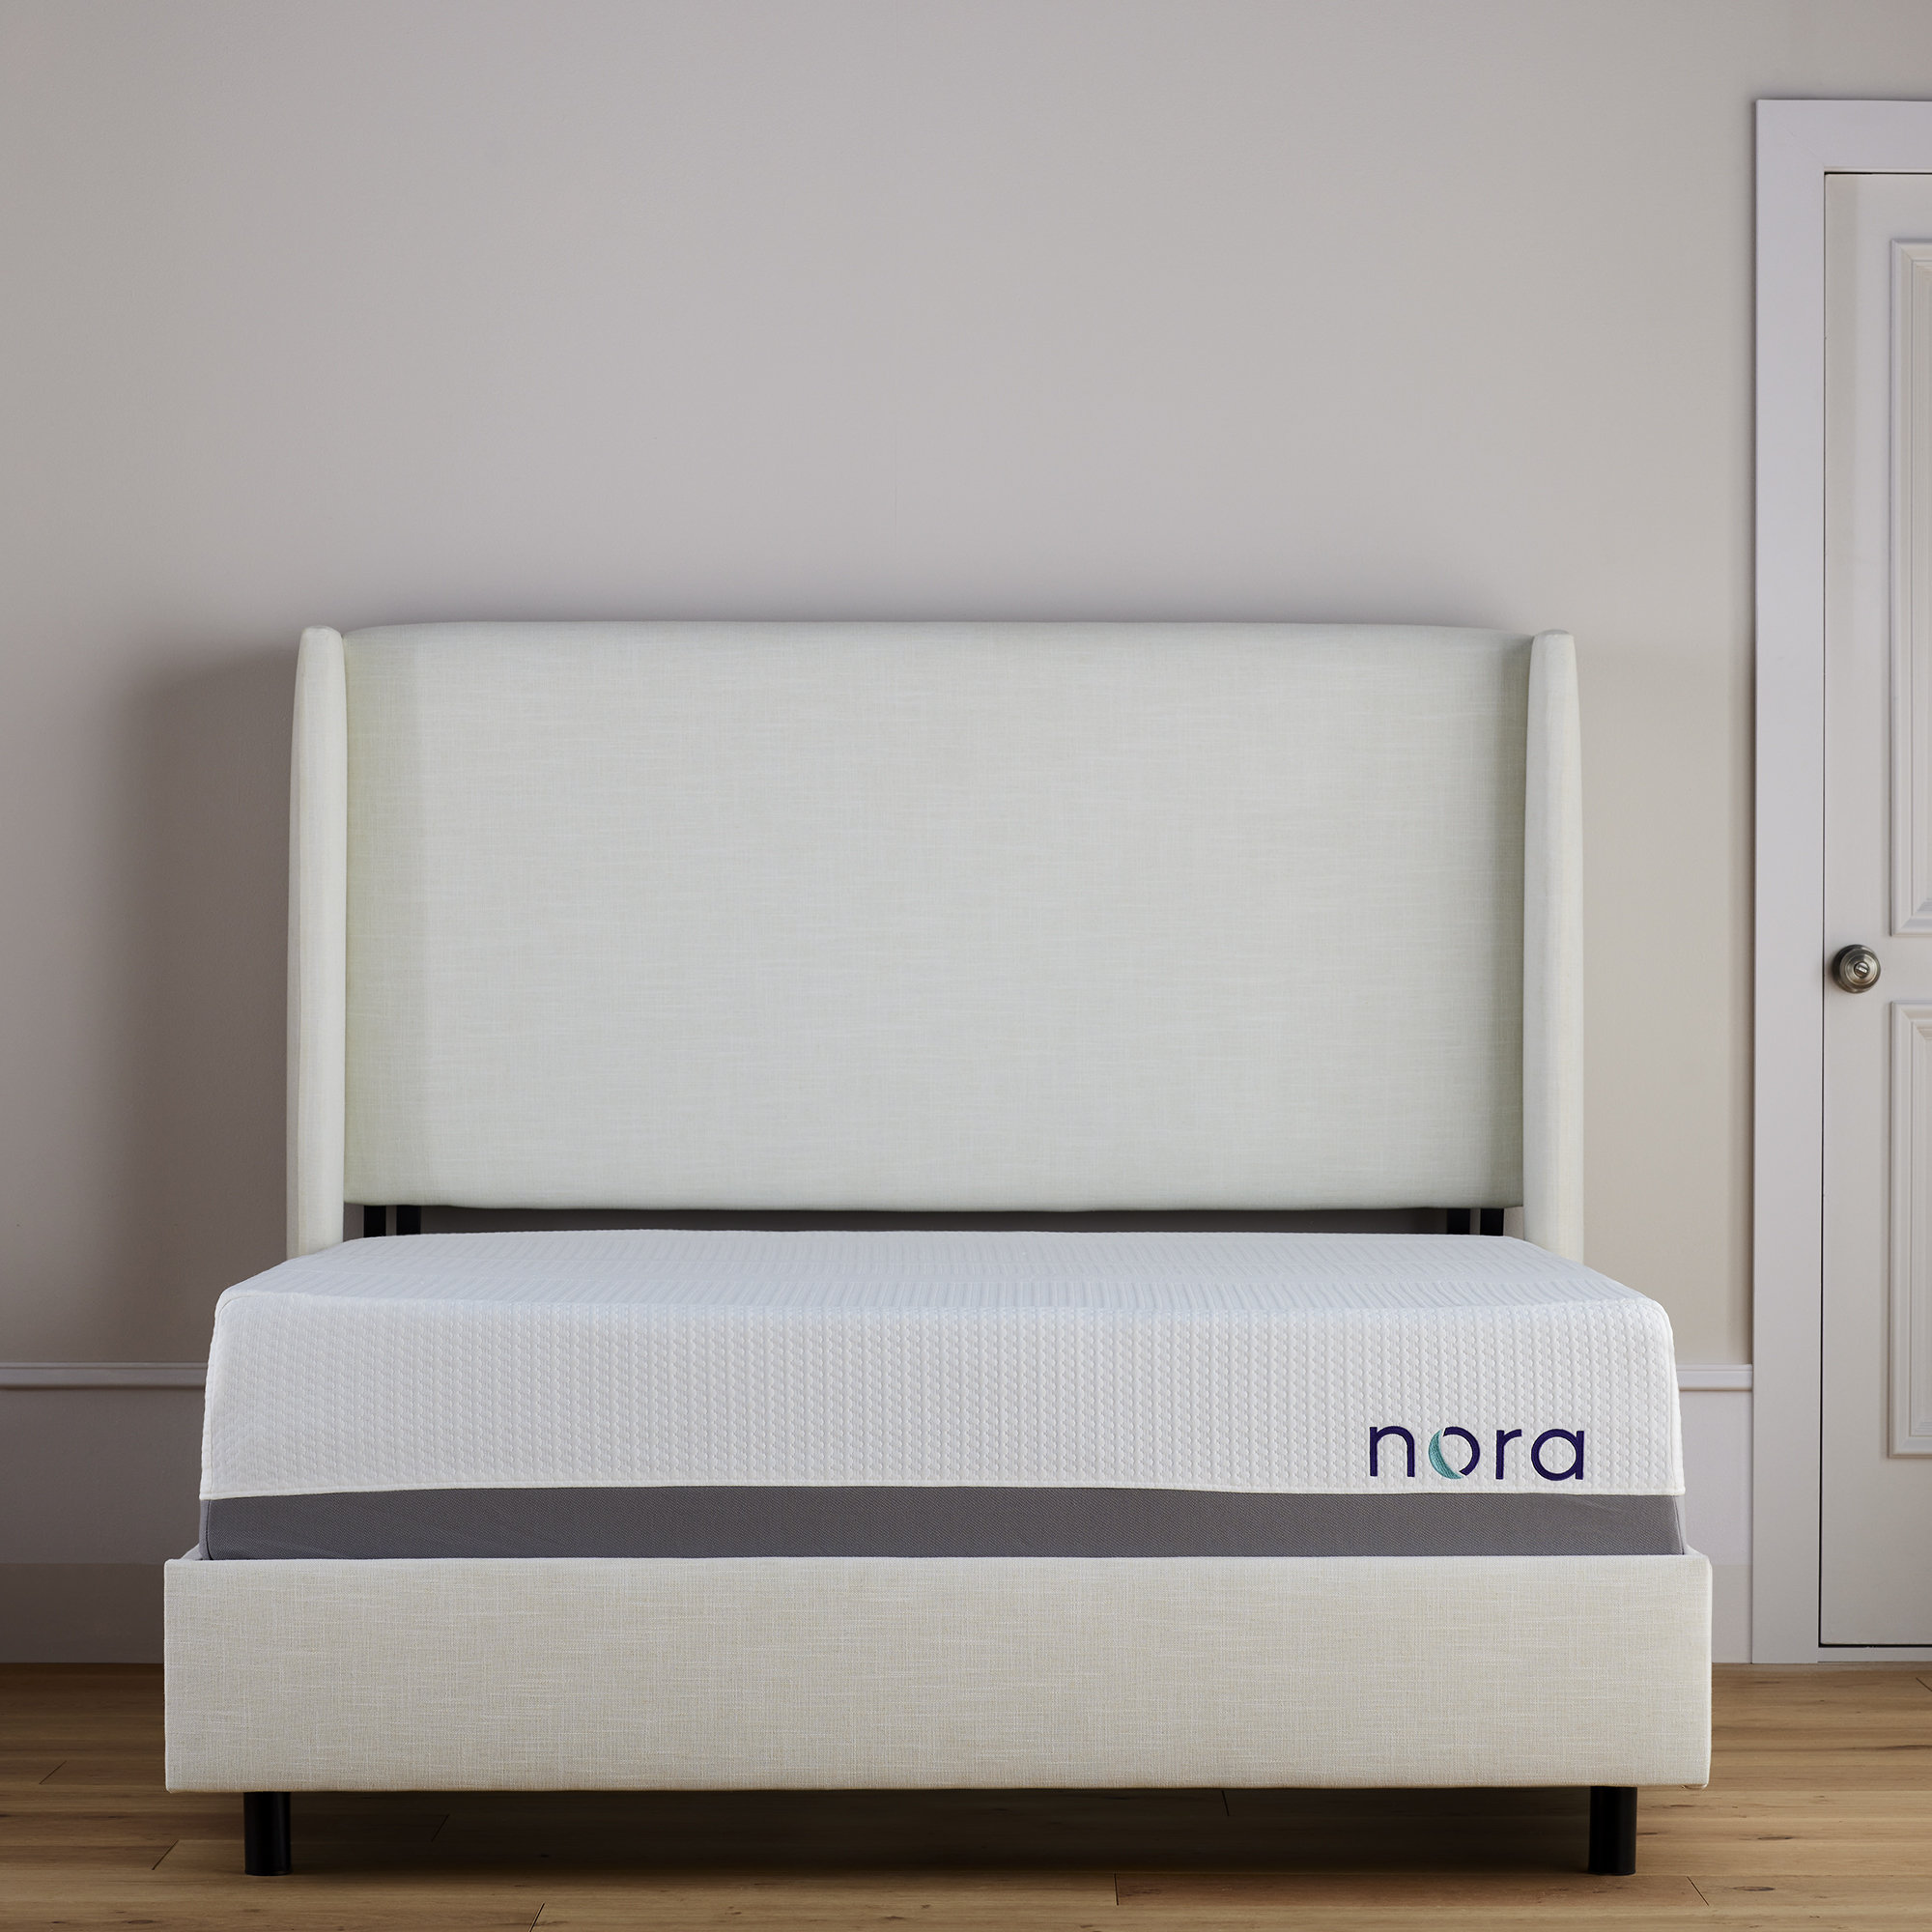 Nora® Medium Cooling Gel Memory Foam Mattress with Cooling Cover & Reviews